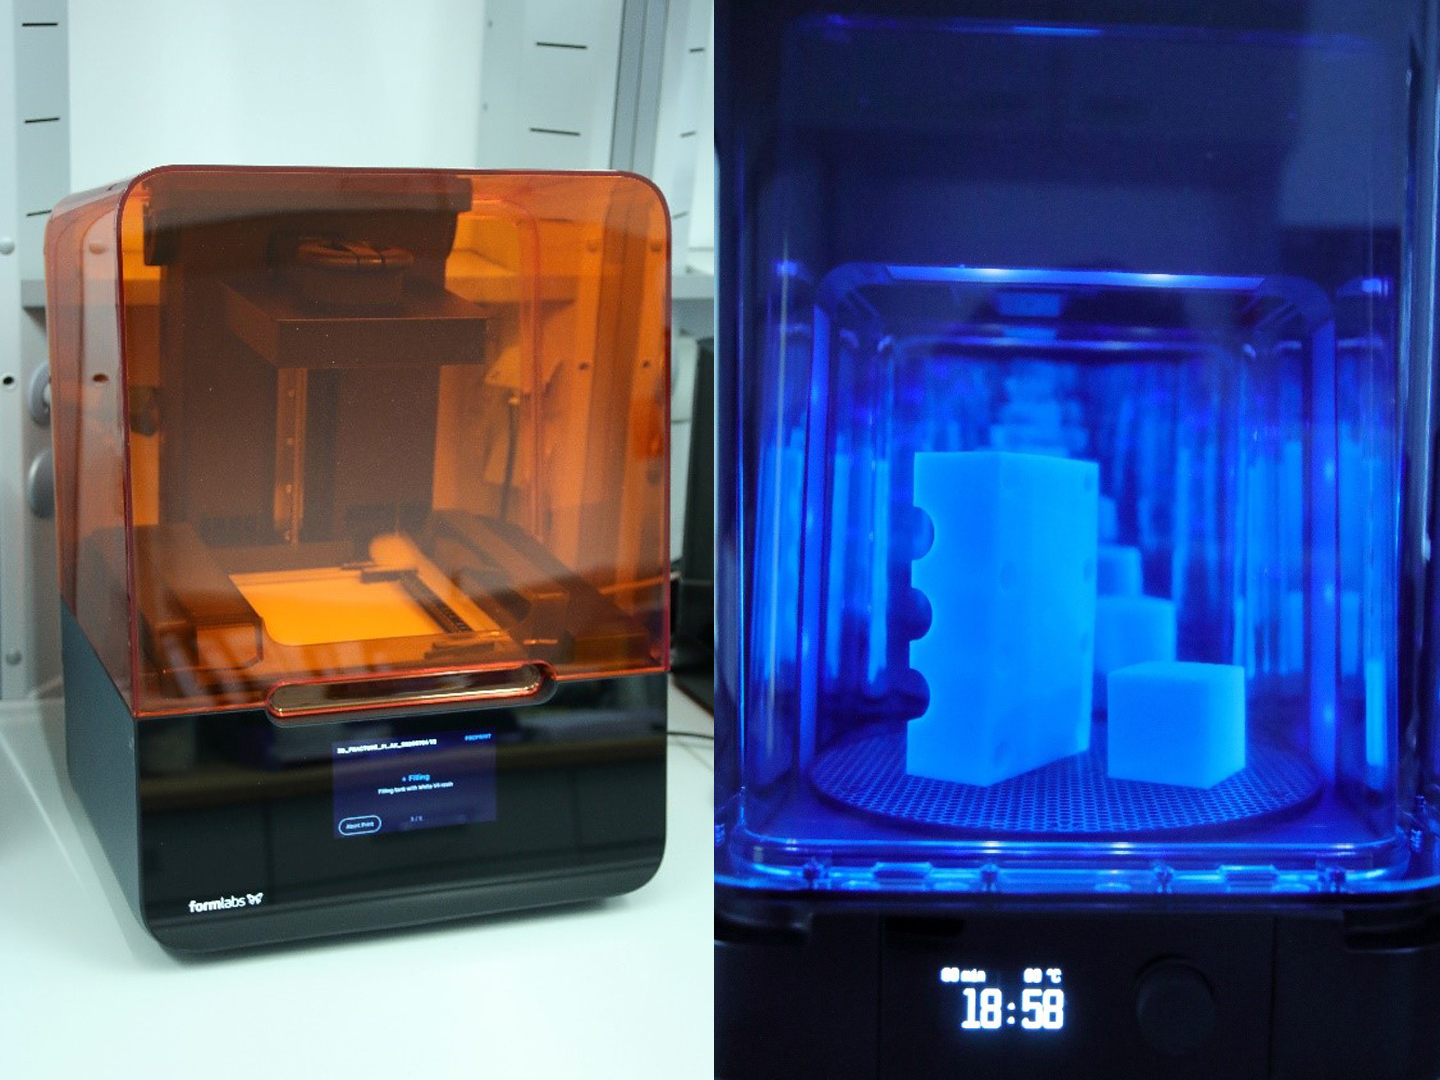 Stereolithography printer (left) and UV chamber for component curing (right).